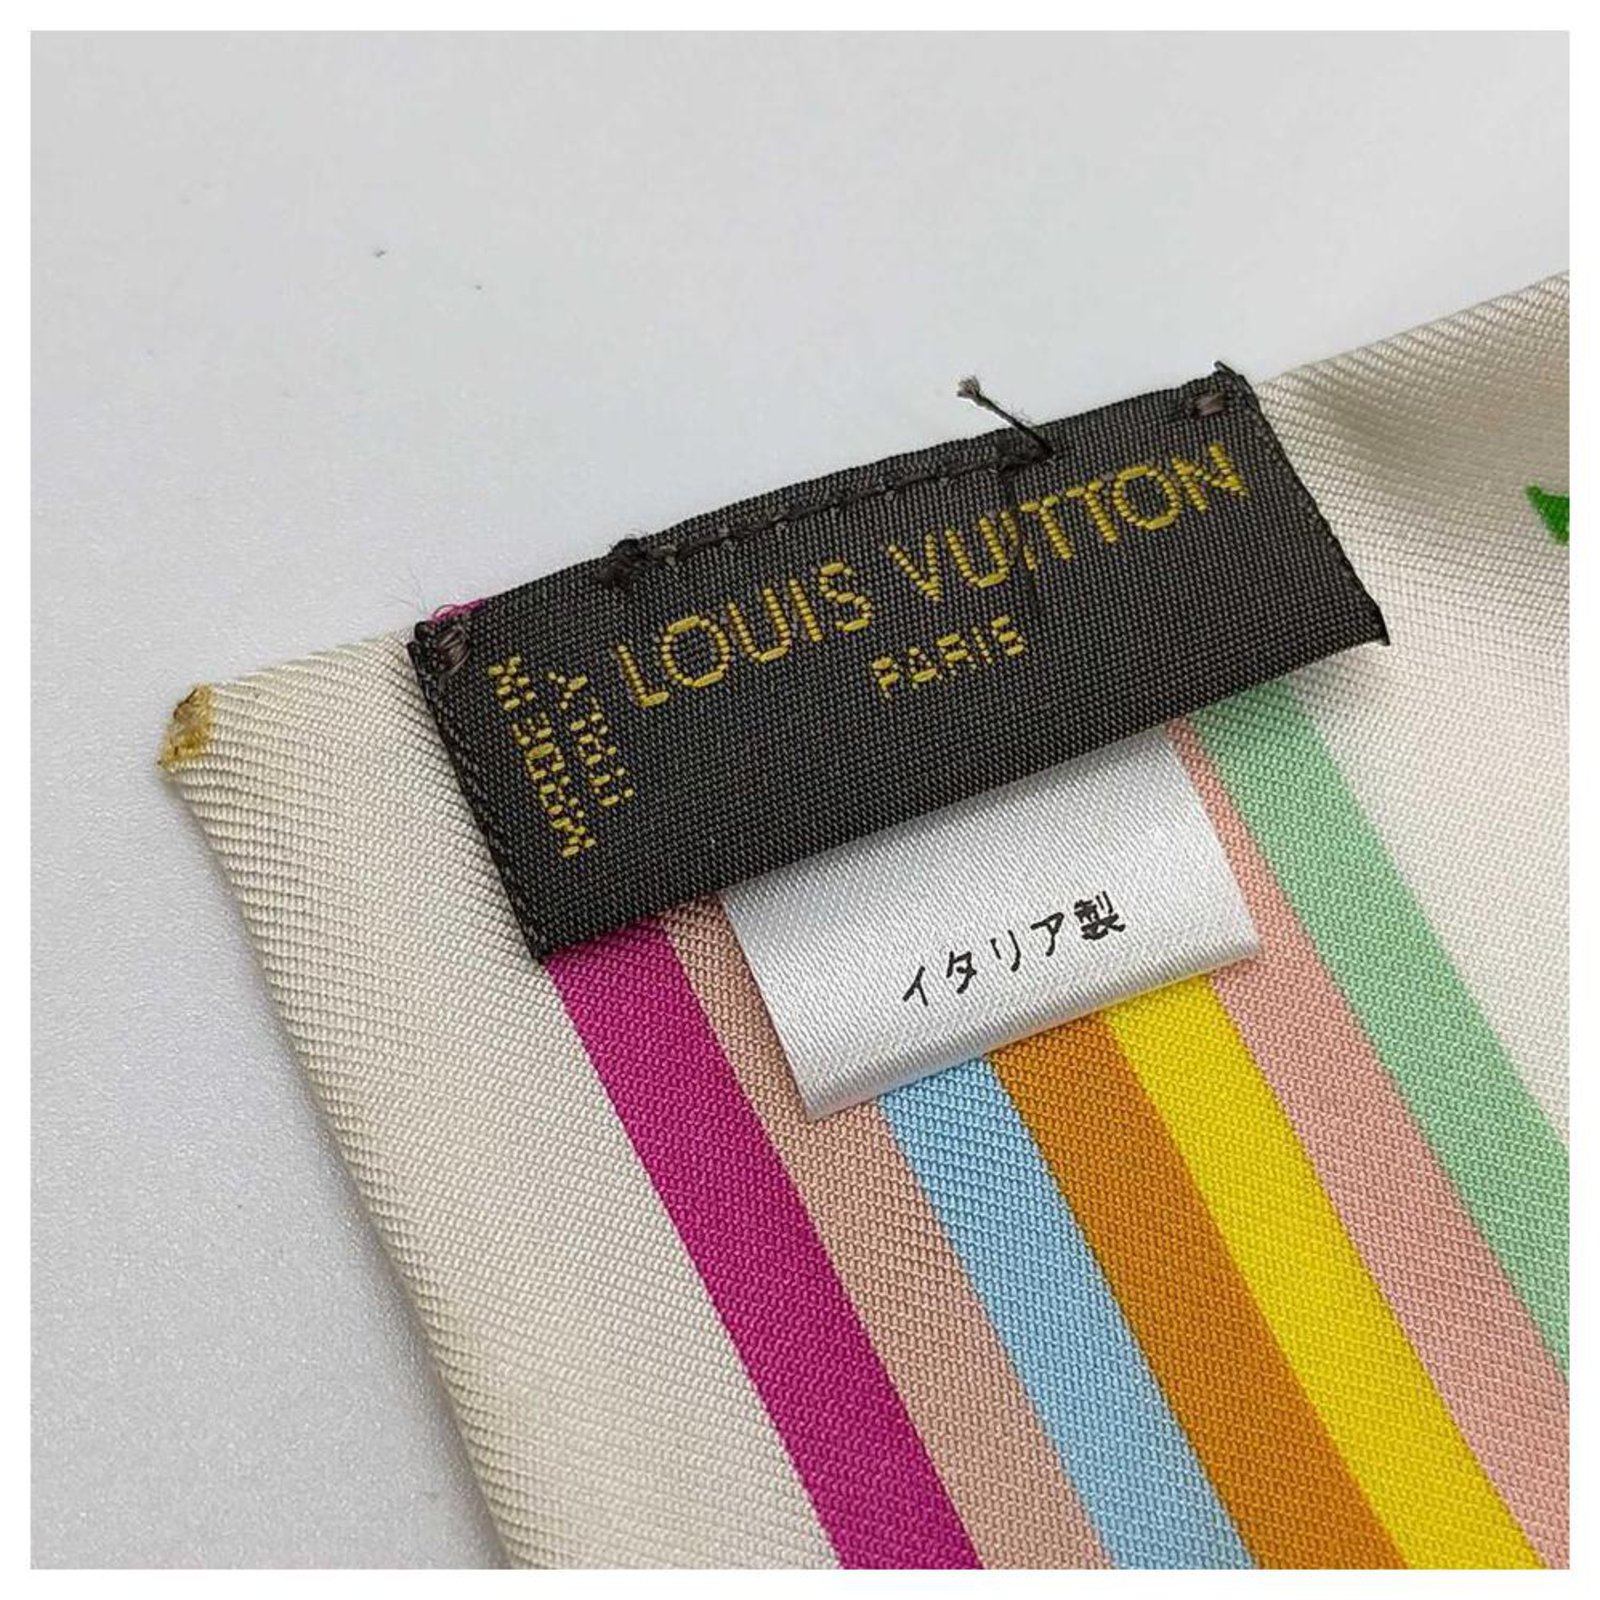 New Louis Vuitton Iconic Speedy Silk Twilly Scarf in Box